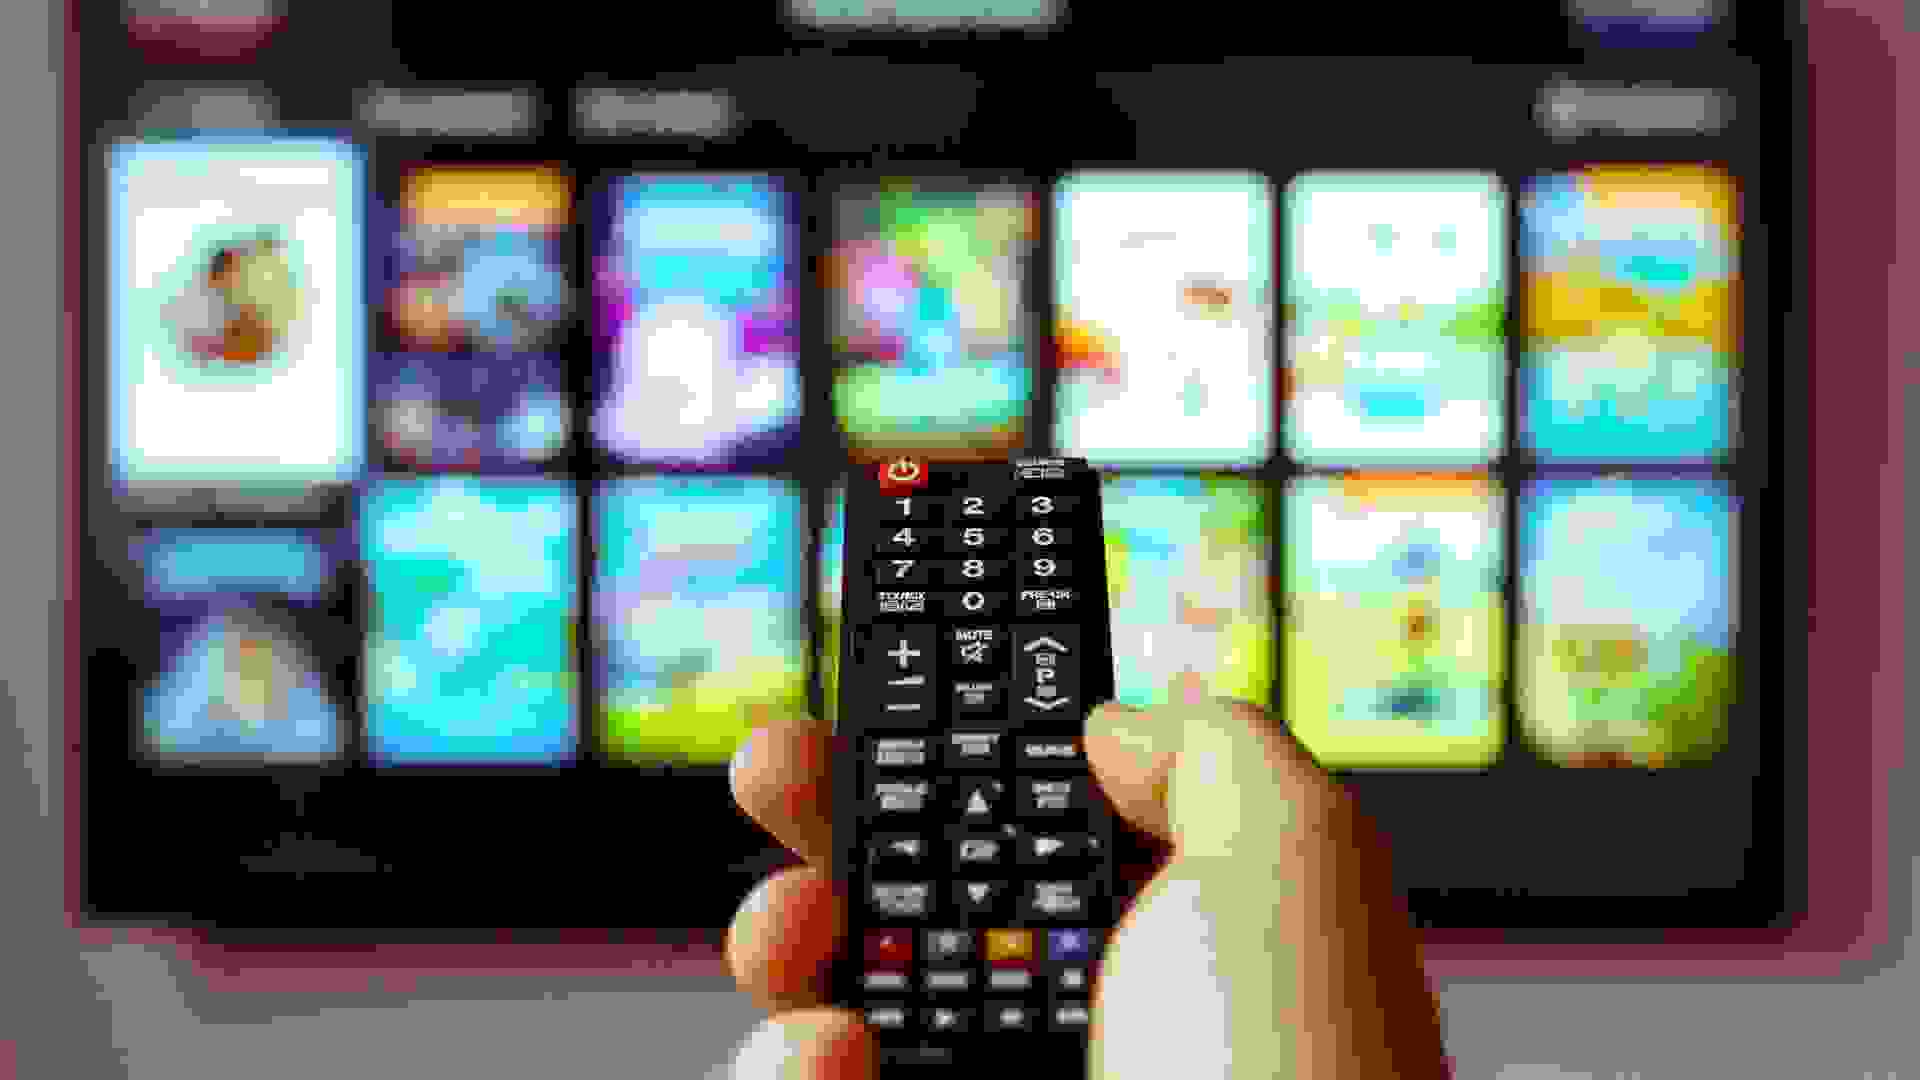 Male hand holding TV remote control.